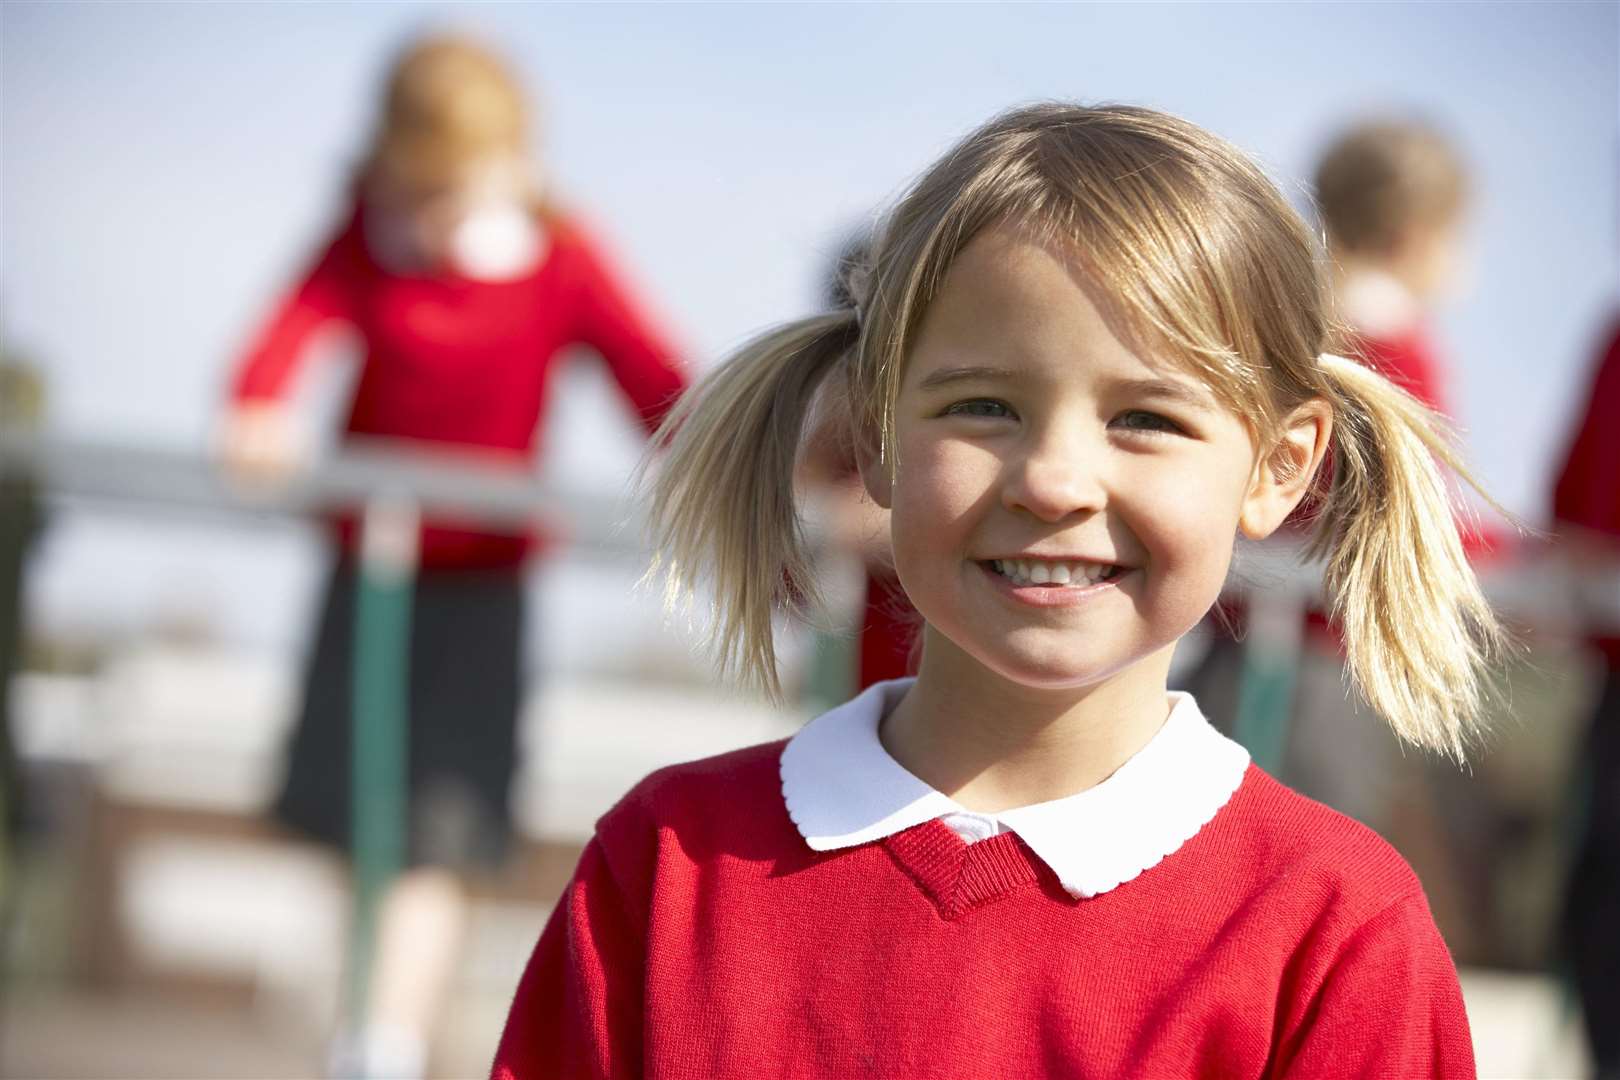 Putting the school uniform on - and off - will help pupils rehearse for school.